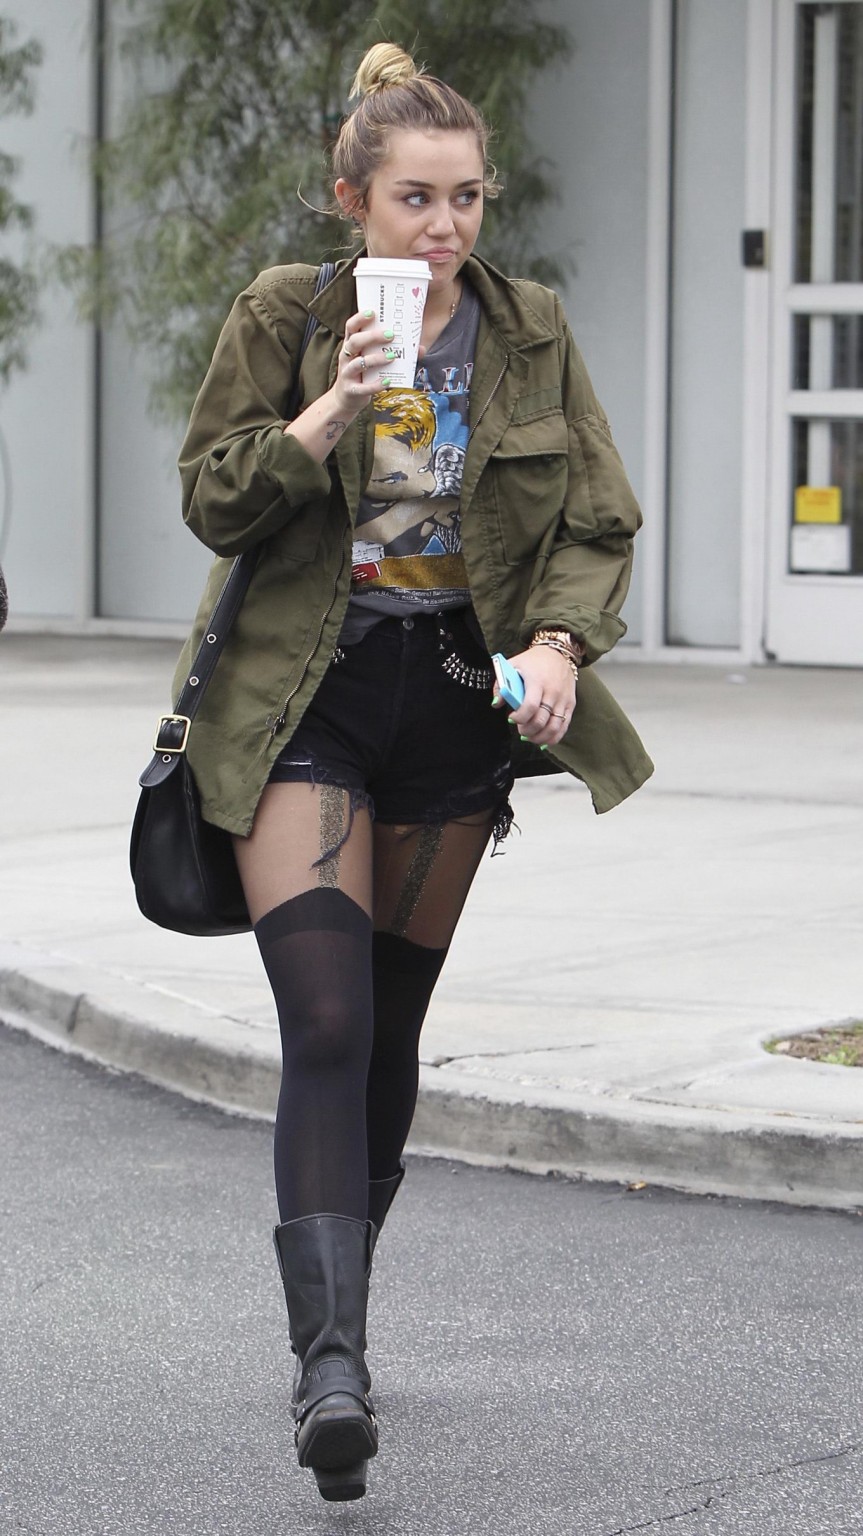 Miley Cyrus leggy wearing stockings  biker boots outside Starbucks in Hollywood #75274280